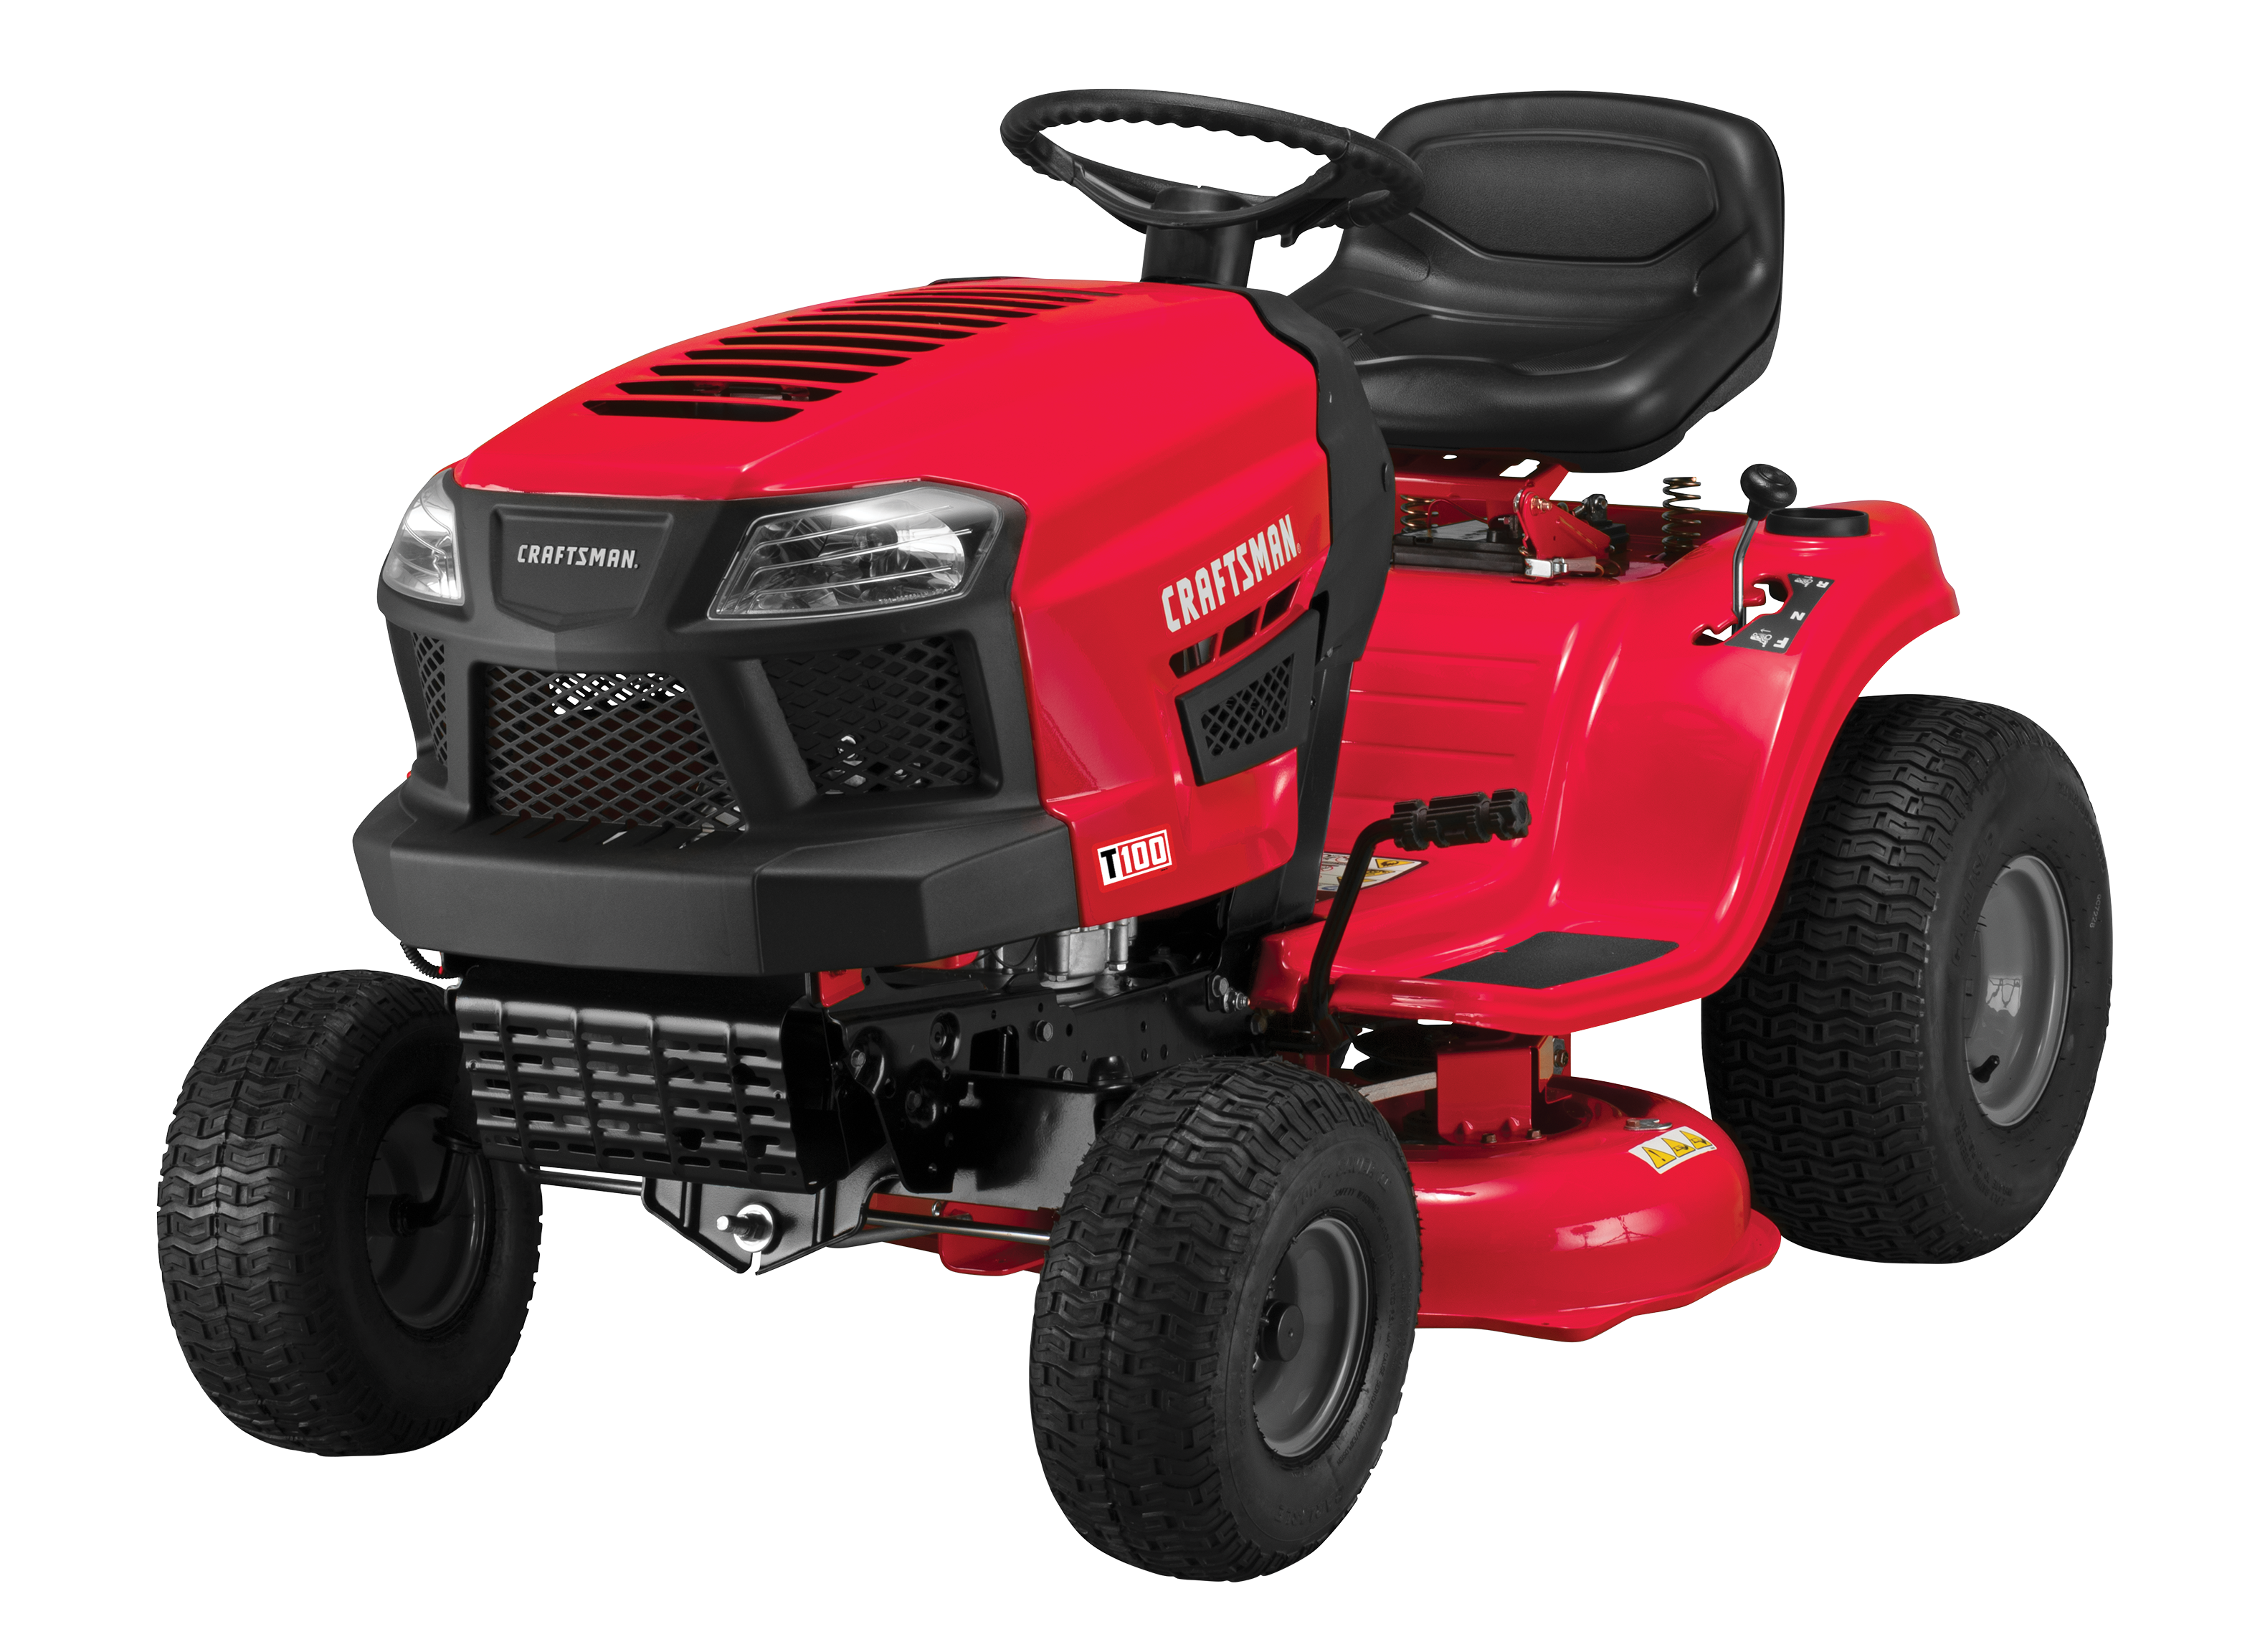 Craftsman T100 Lawn Mower Tractor Consumer Reports